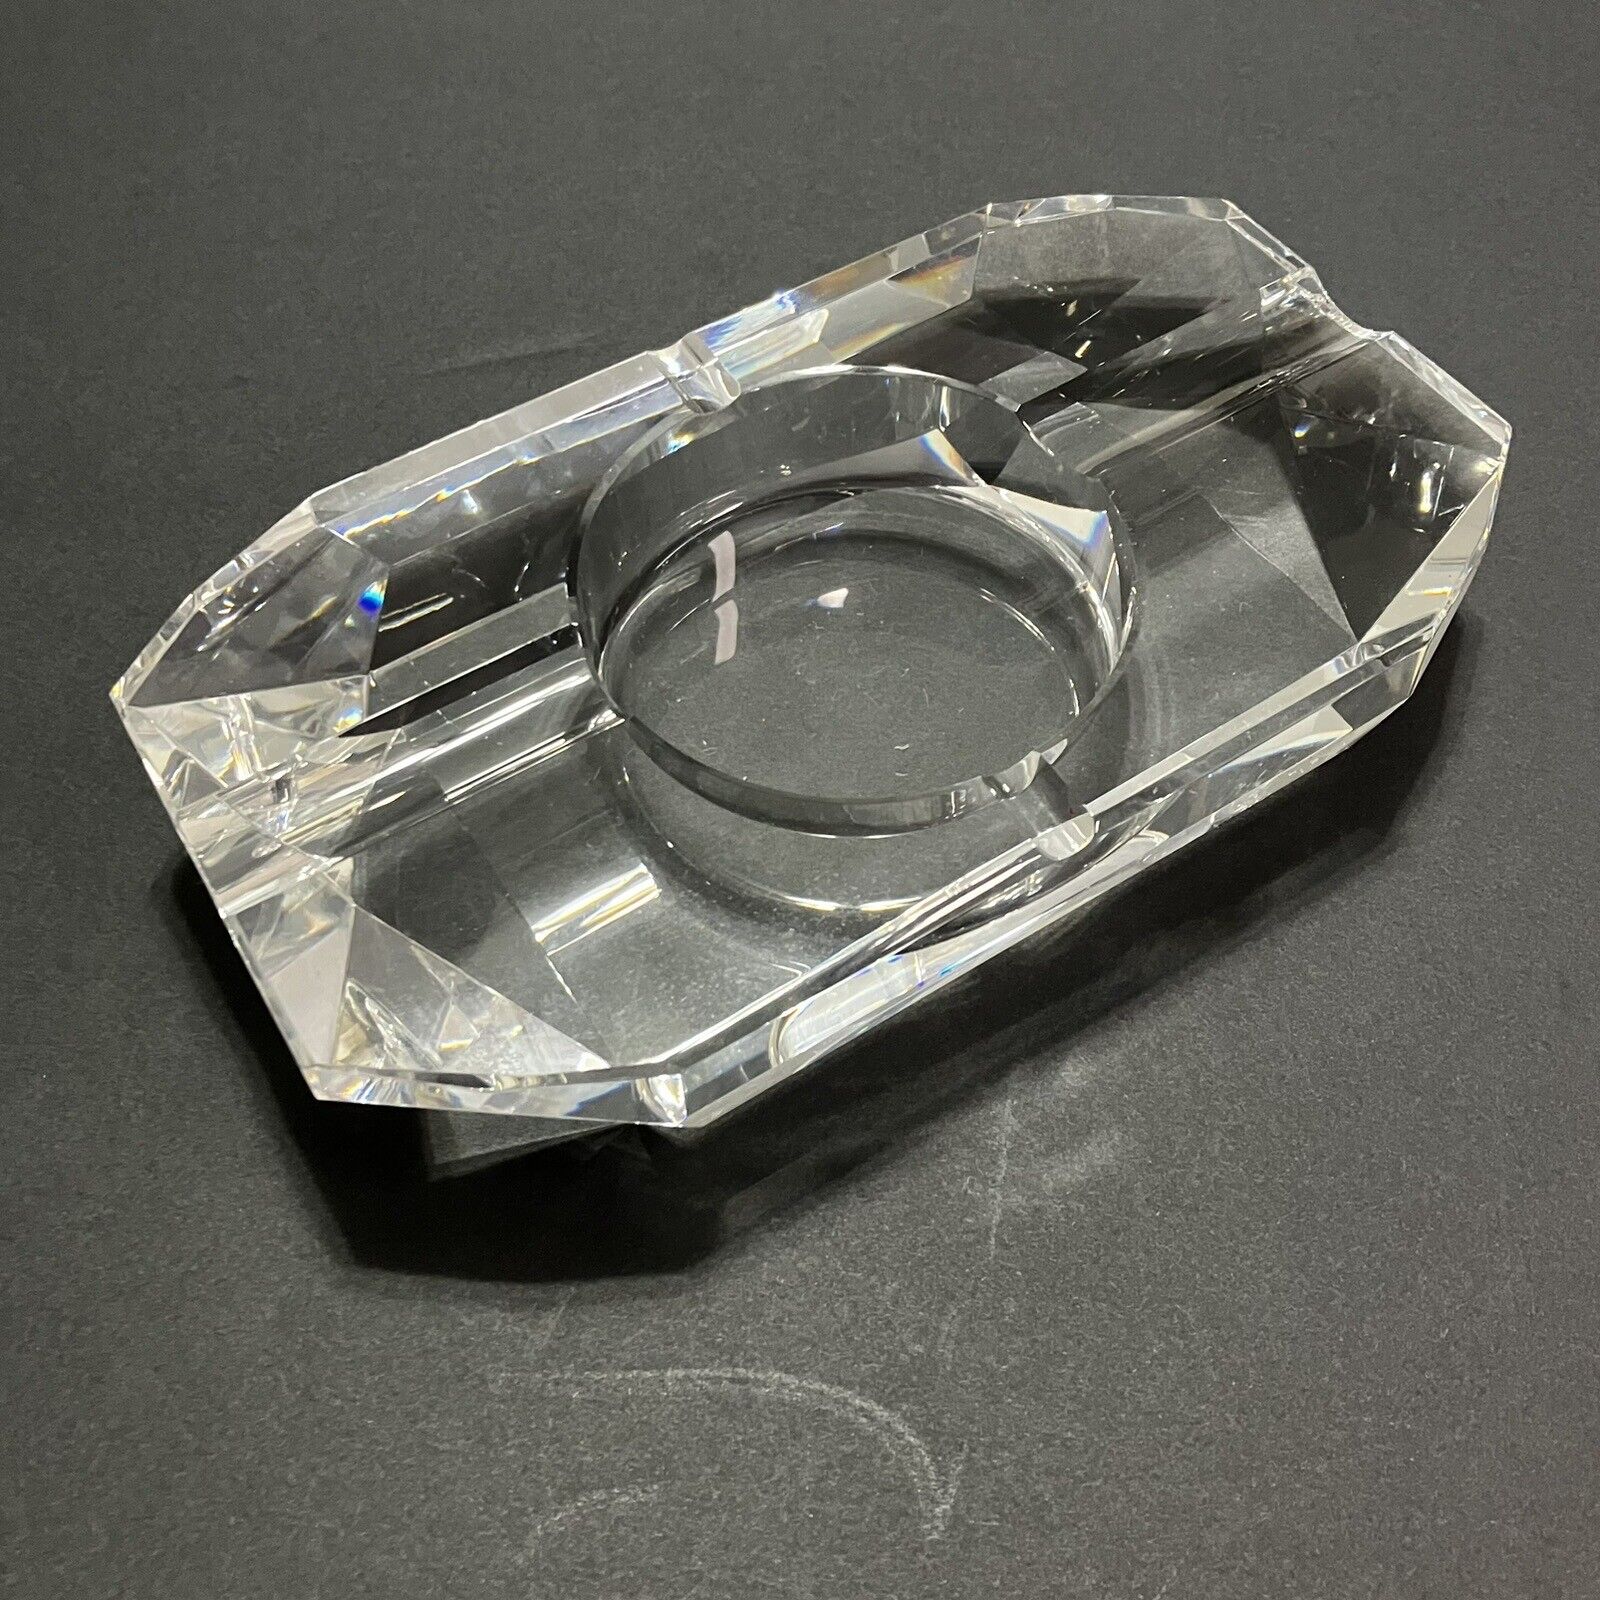 Faceted Diamond Cut Crystal Ashtray Oblong Art Deco Cigarette and Cigar Glass